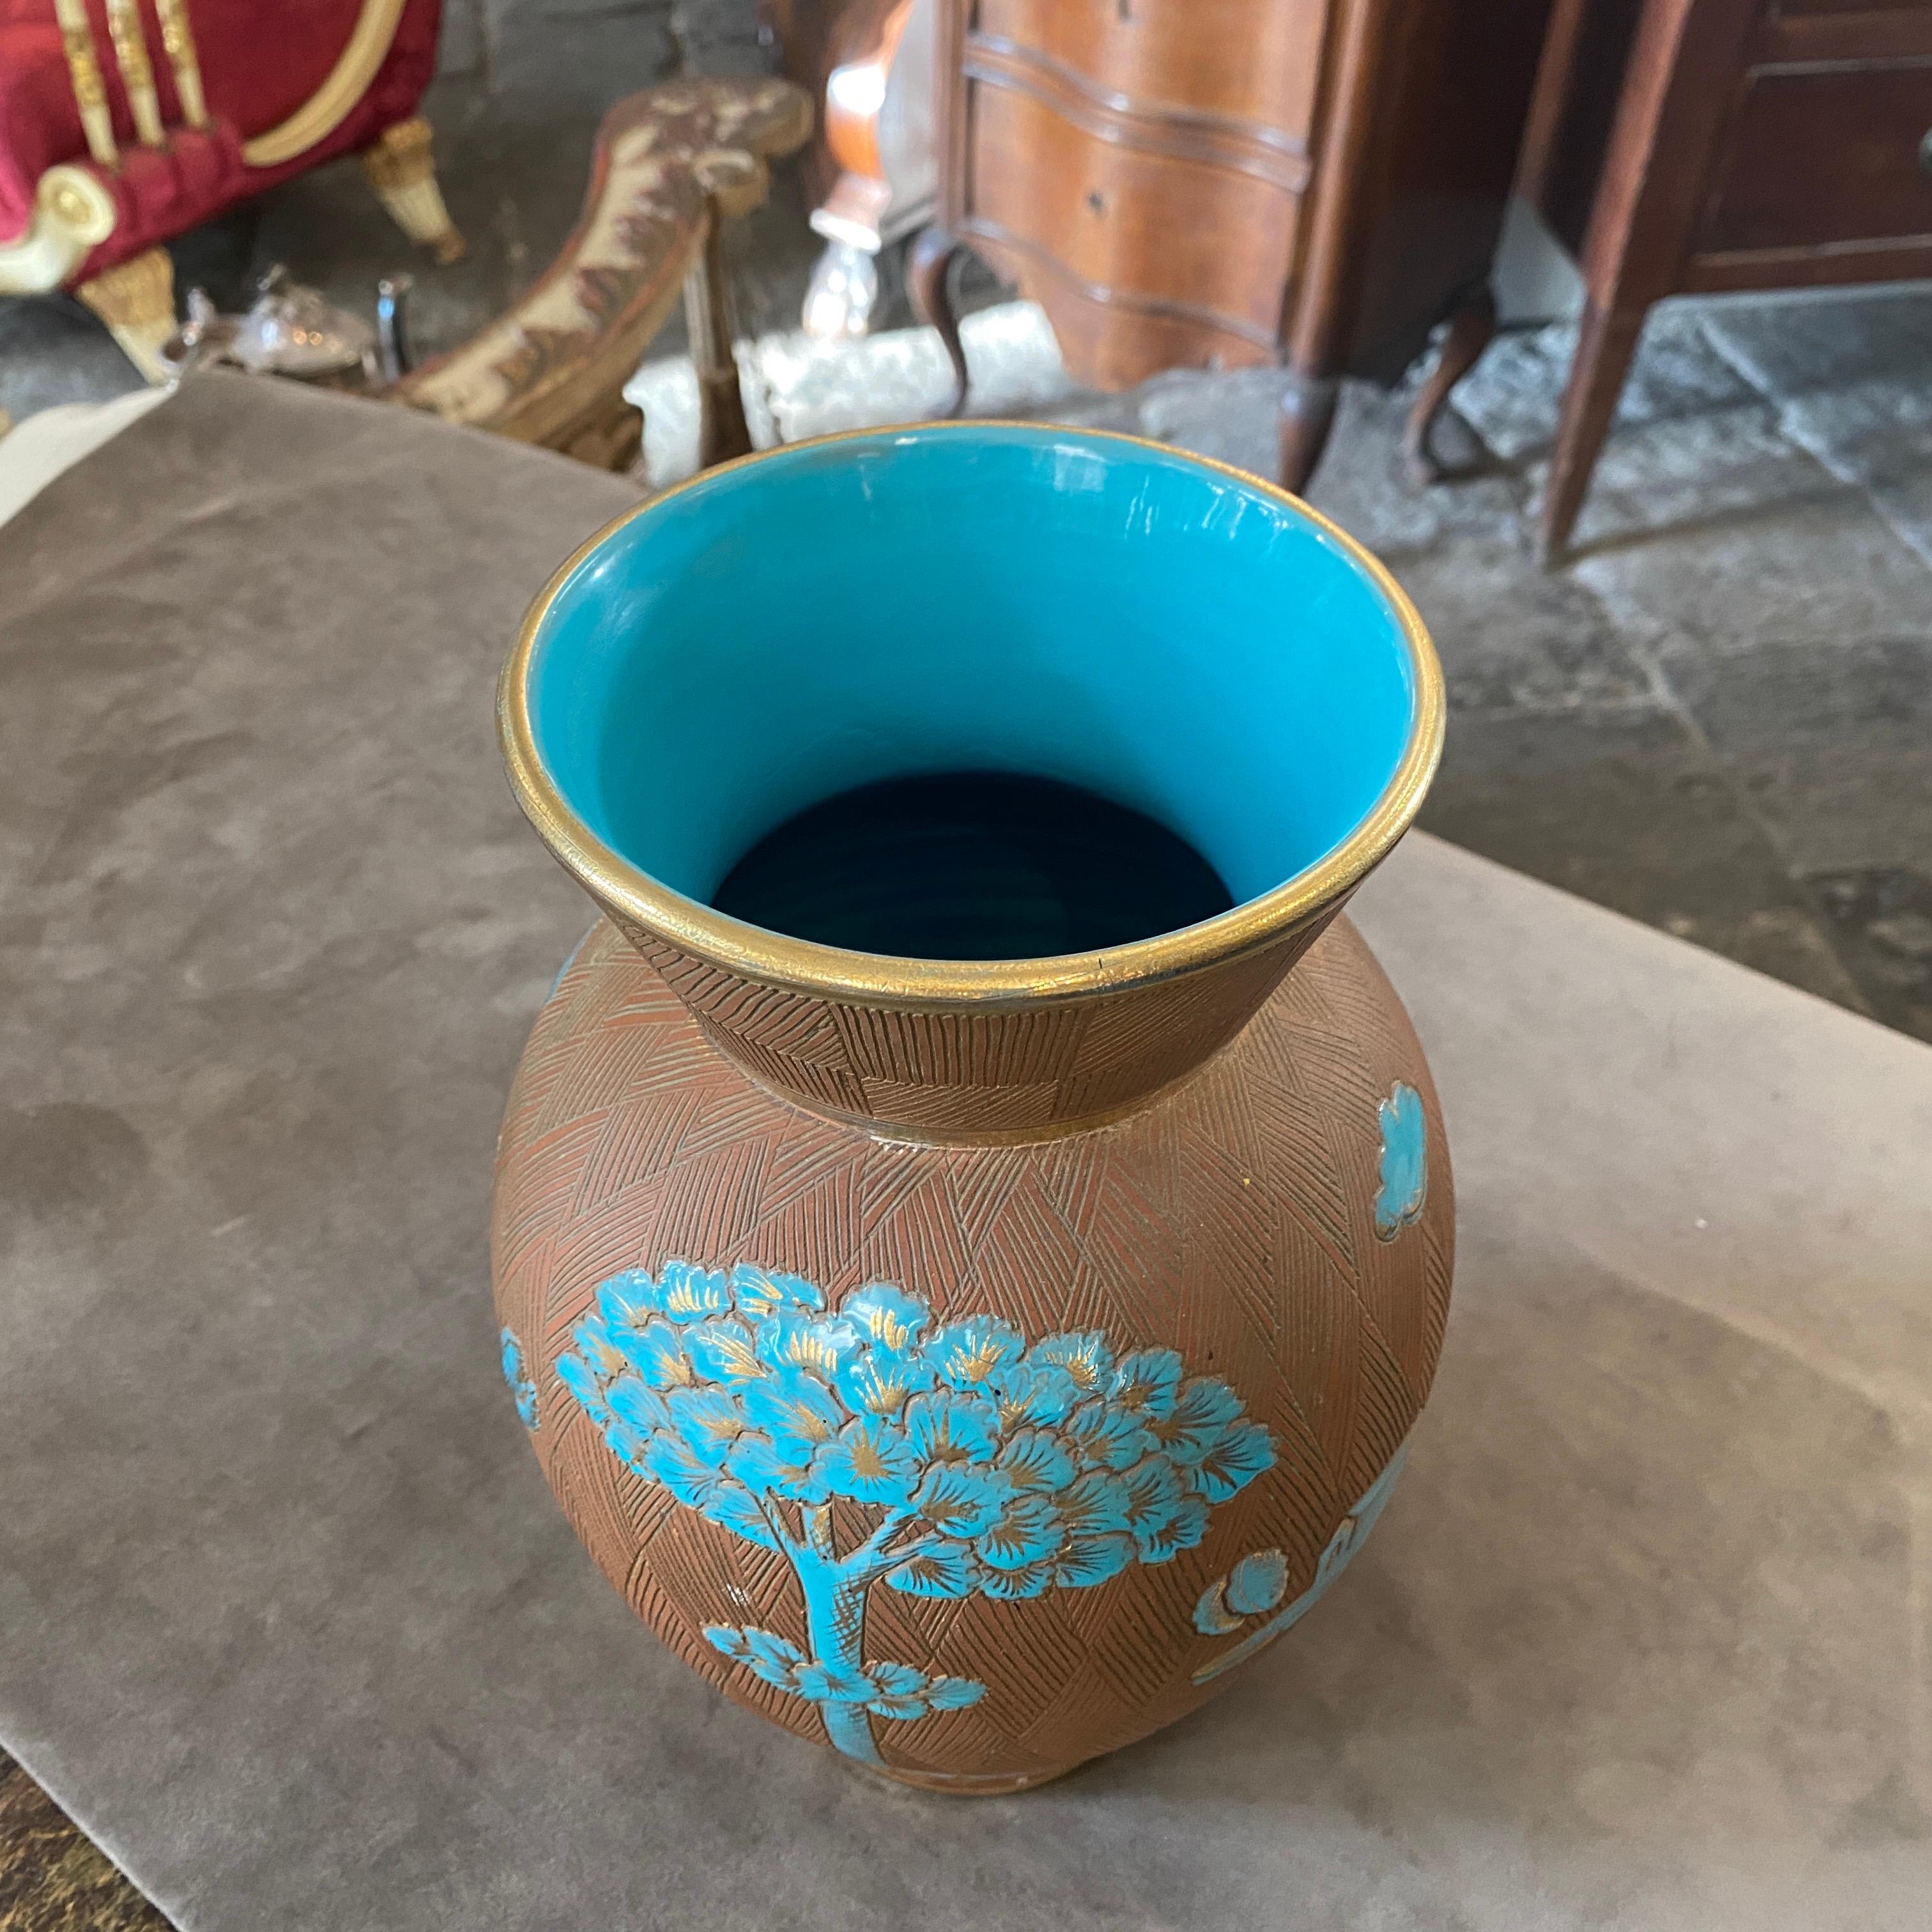 1950s Mid-Century Modern Blue and Brown Ceramic Italian Vase by Fantechi In Good Condition For Sale In Aci Castello, IT